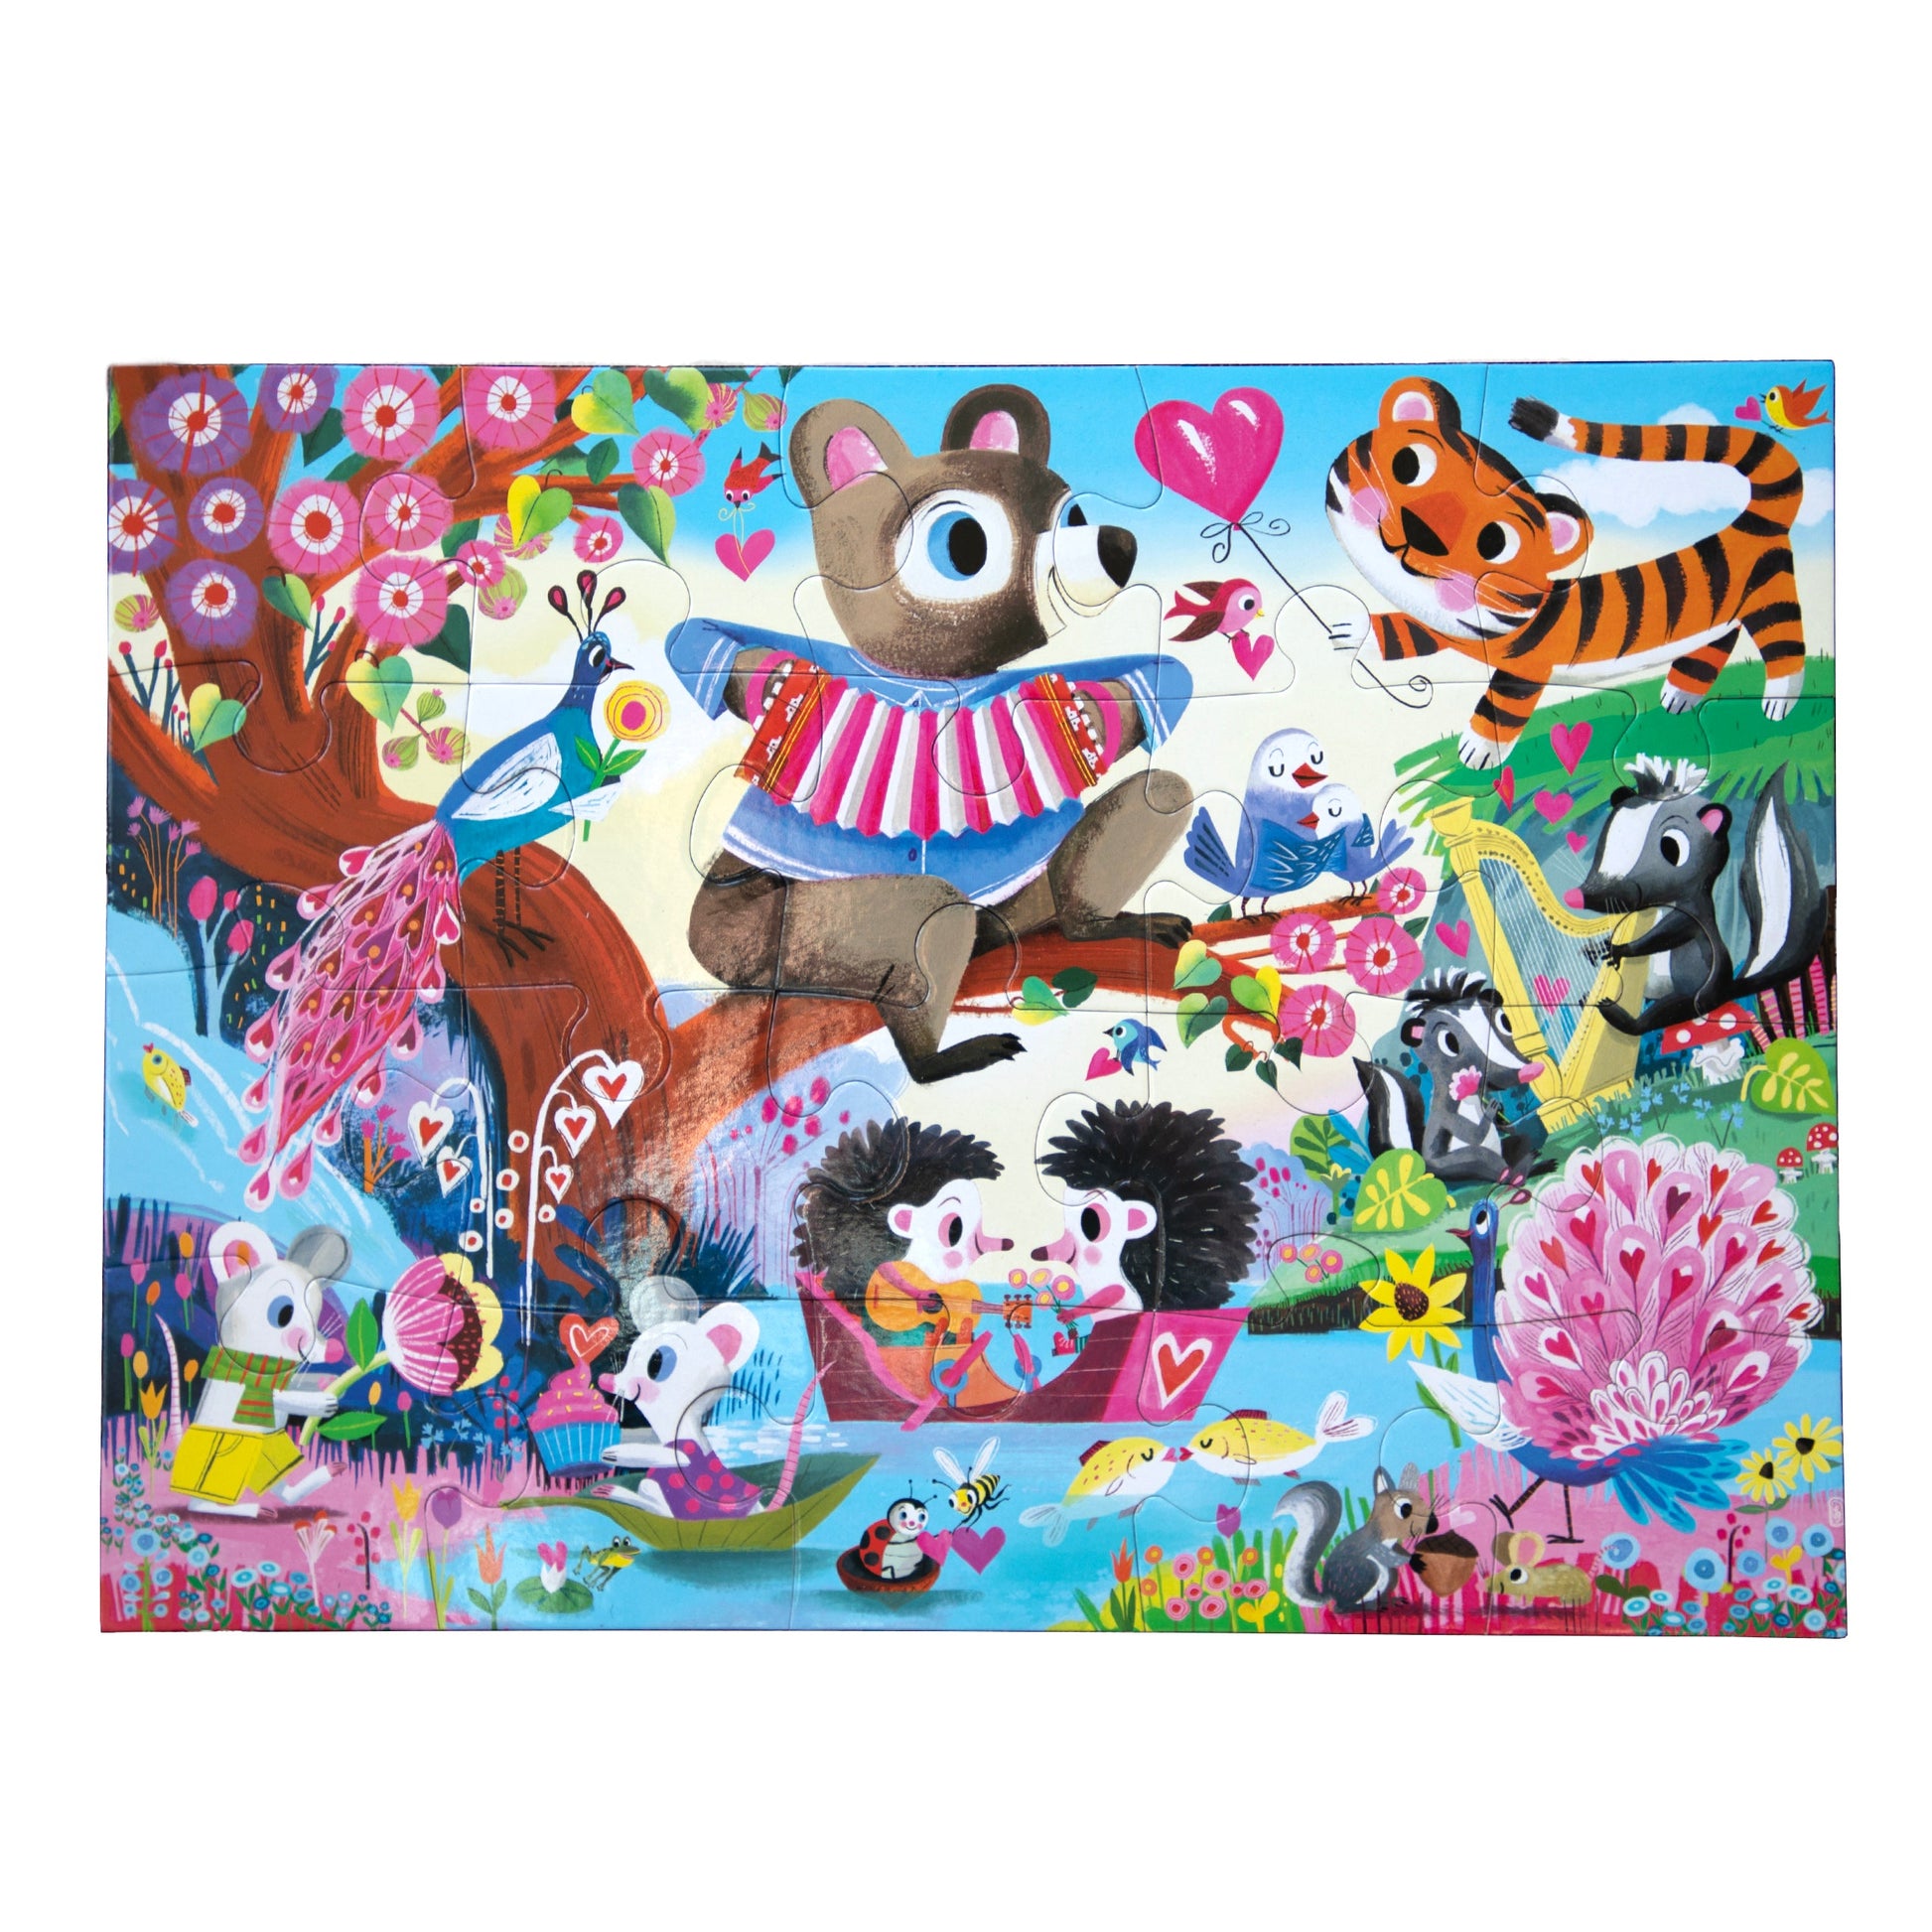 Valentine Love 20 Piece Jigsaw Puzzle | Fun Unique Gifts for Kids 3+